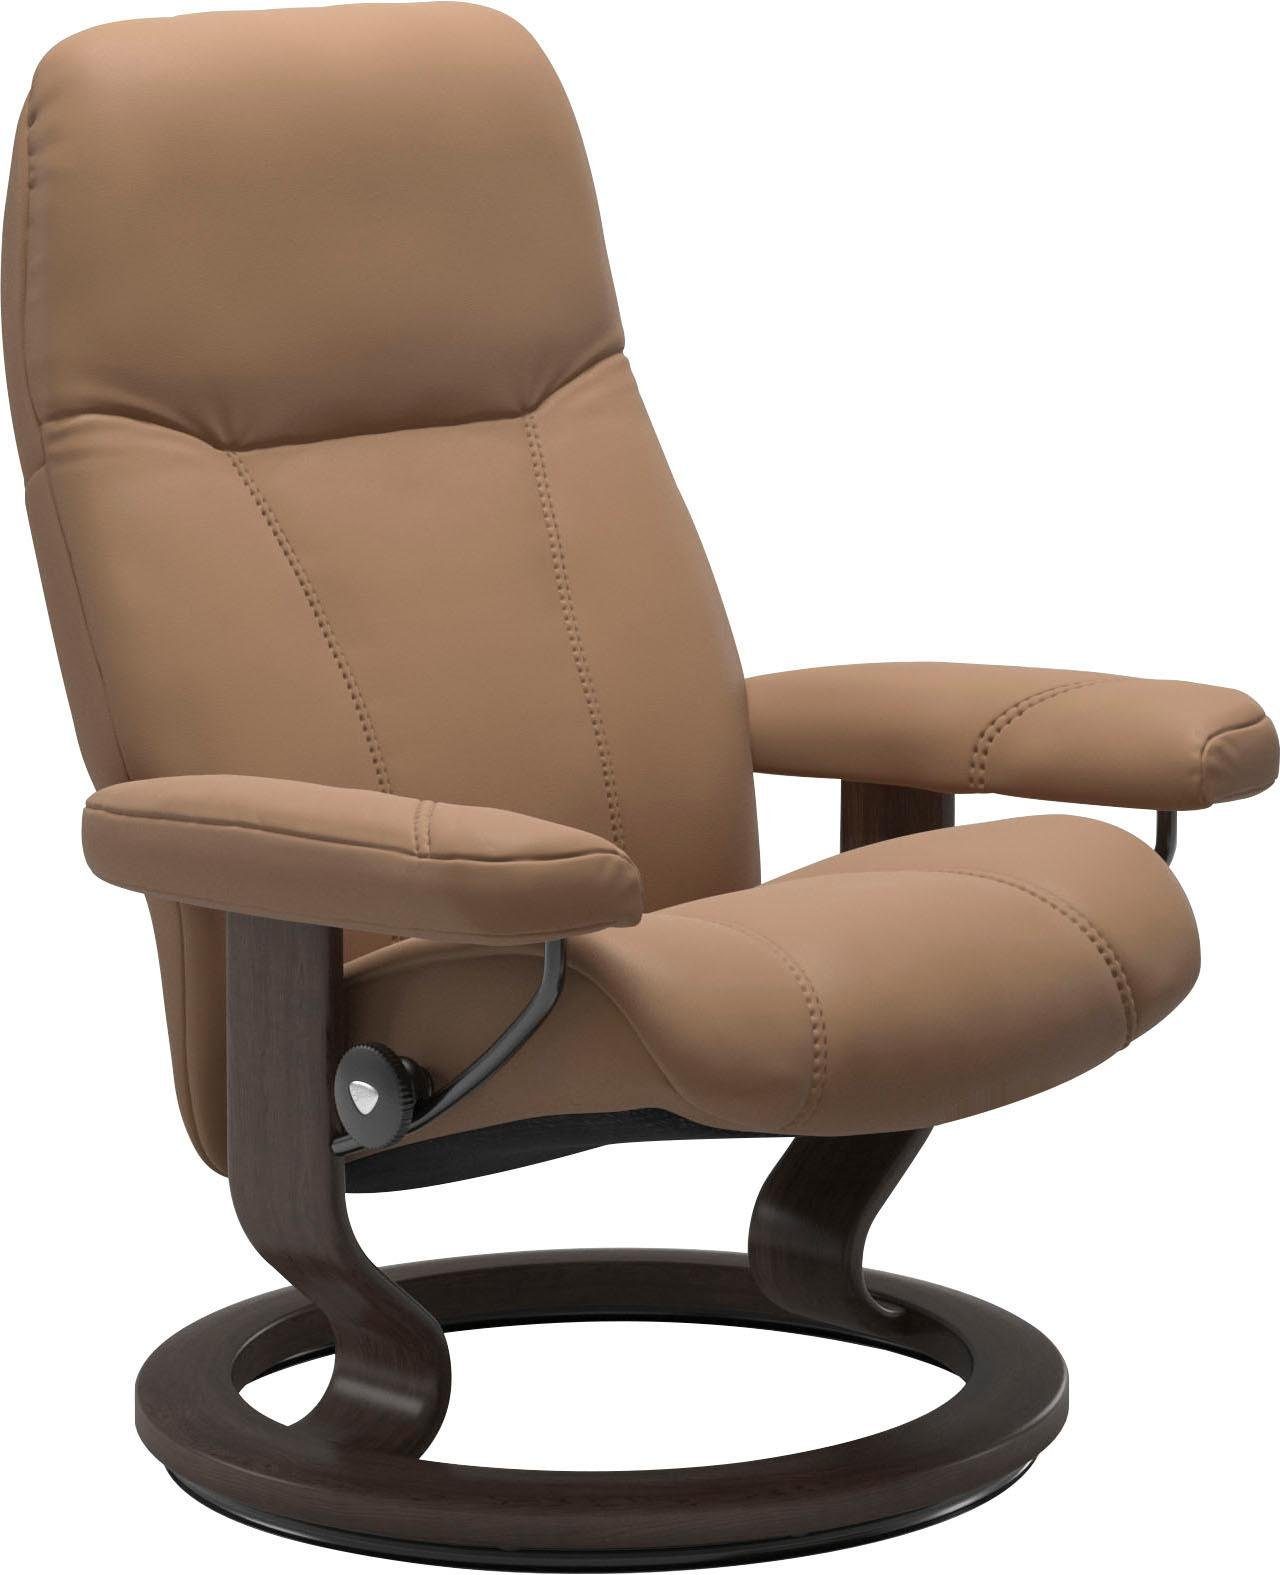 Relaxsessel Classic mit Consul, Größe Wenge Stressless® L, Gestell Base,